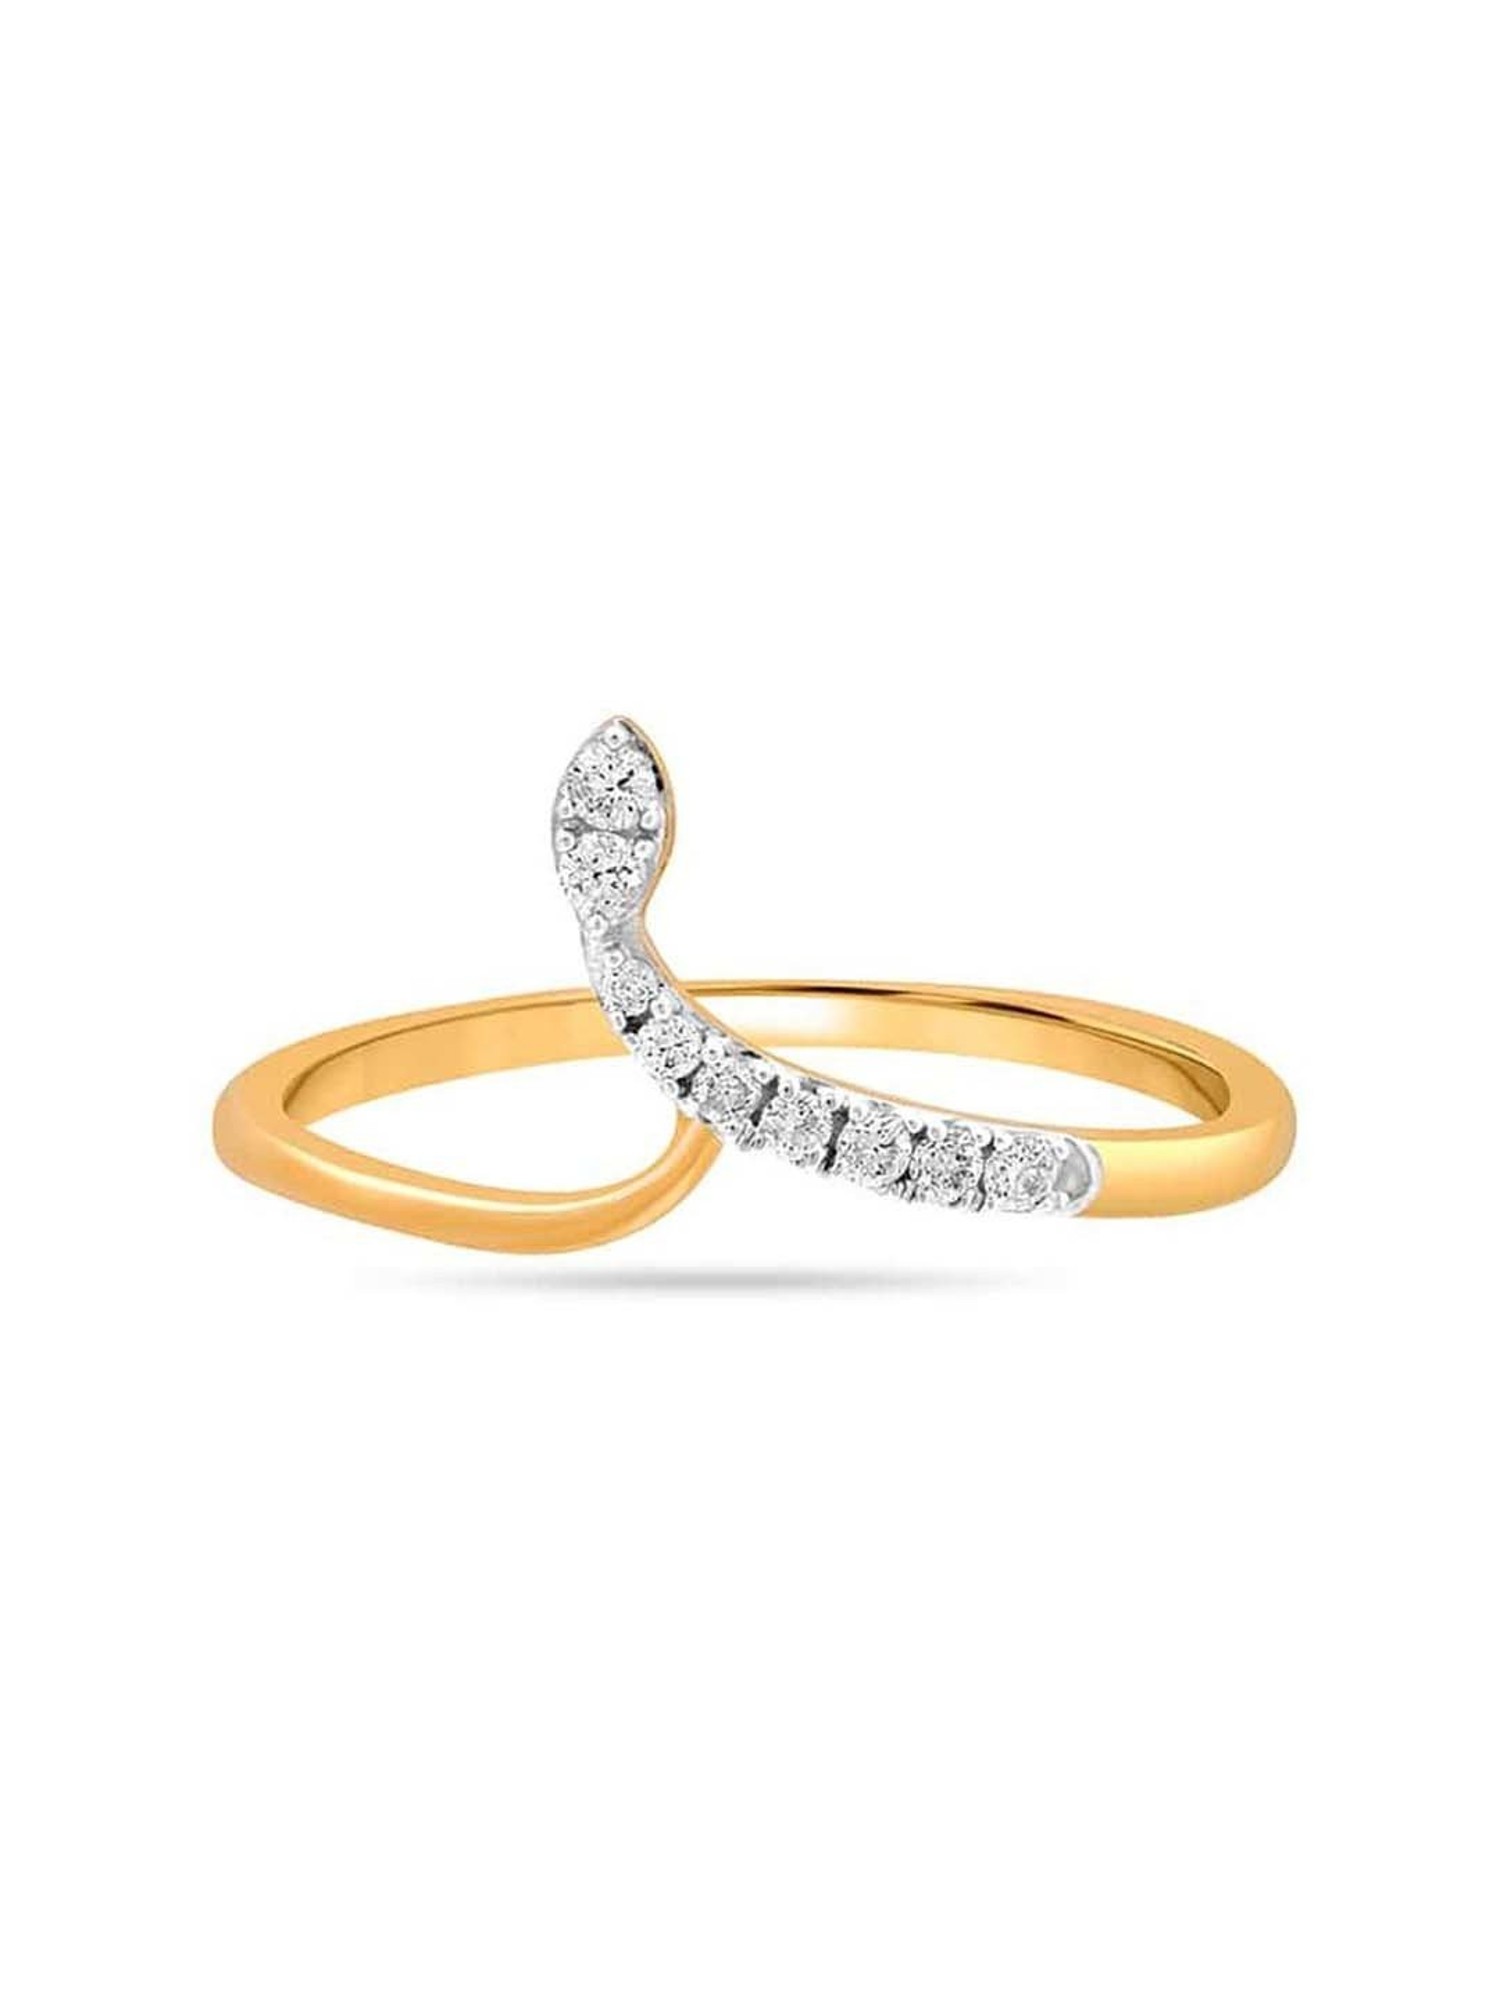 Mia by Tanishq Letter T 14kt Gold Alpha Ring : Amazon.in: Fashion